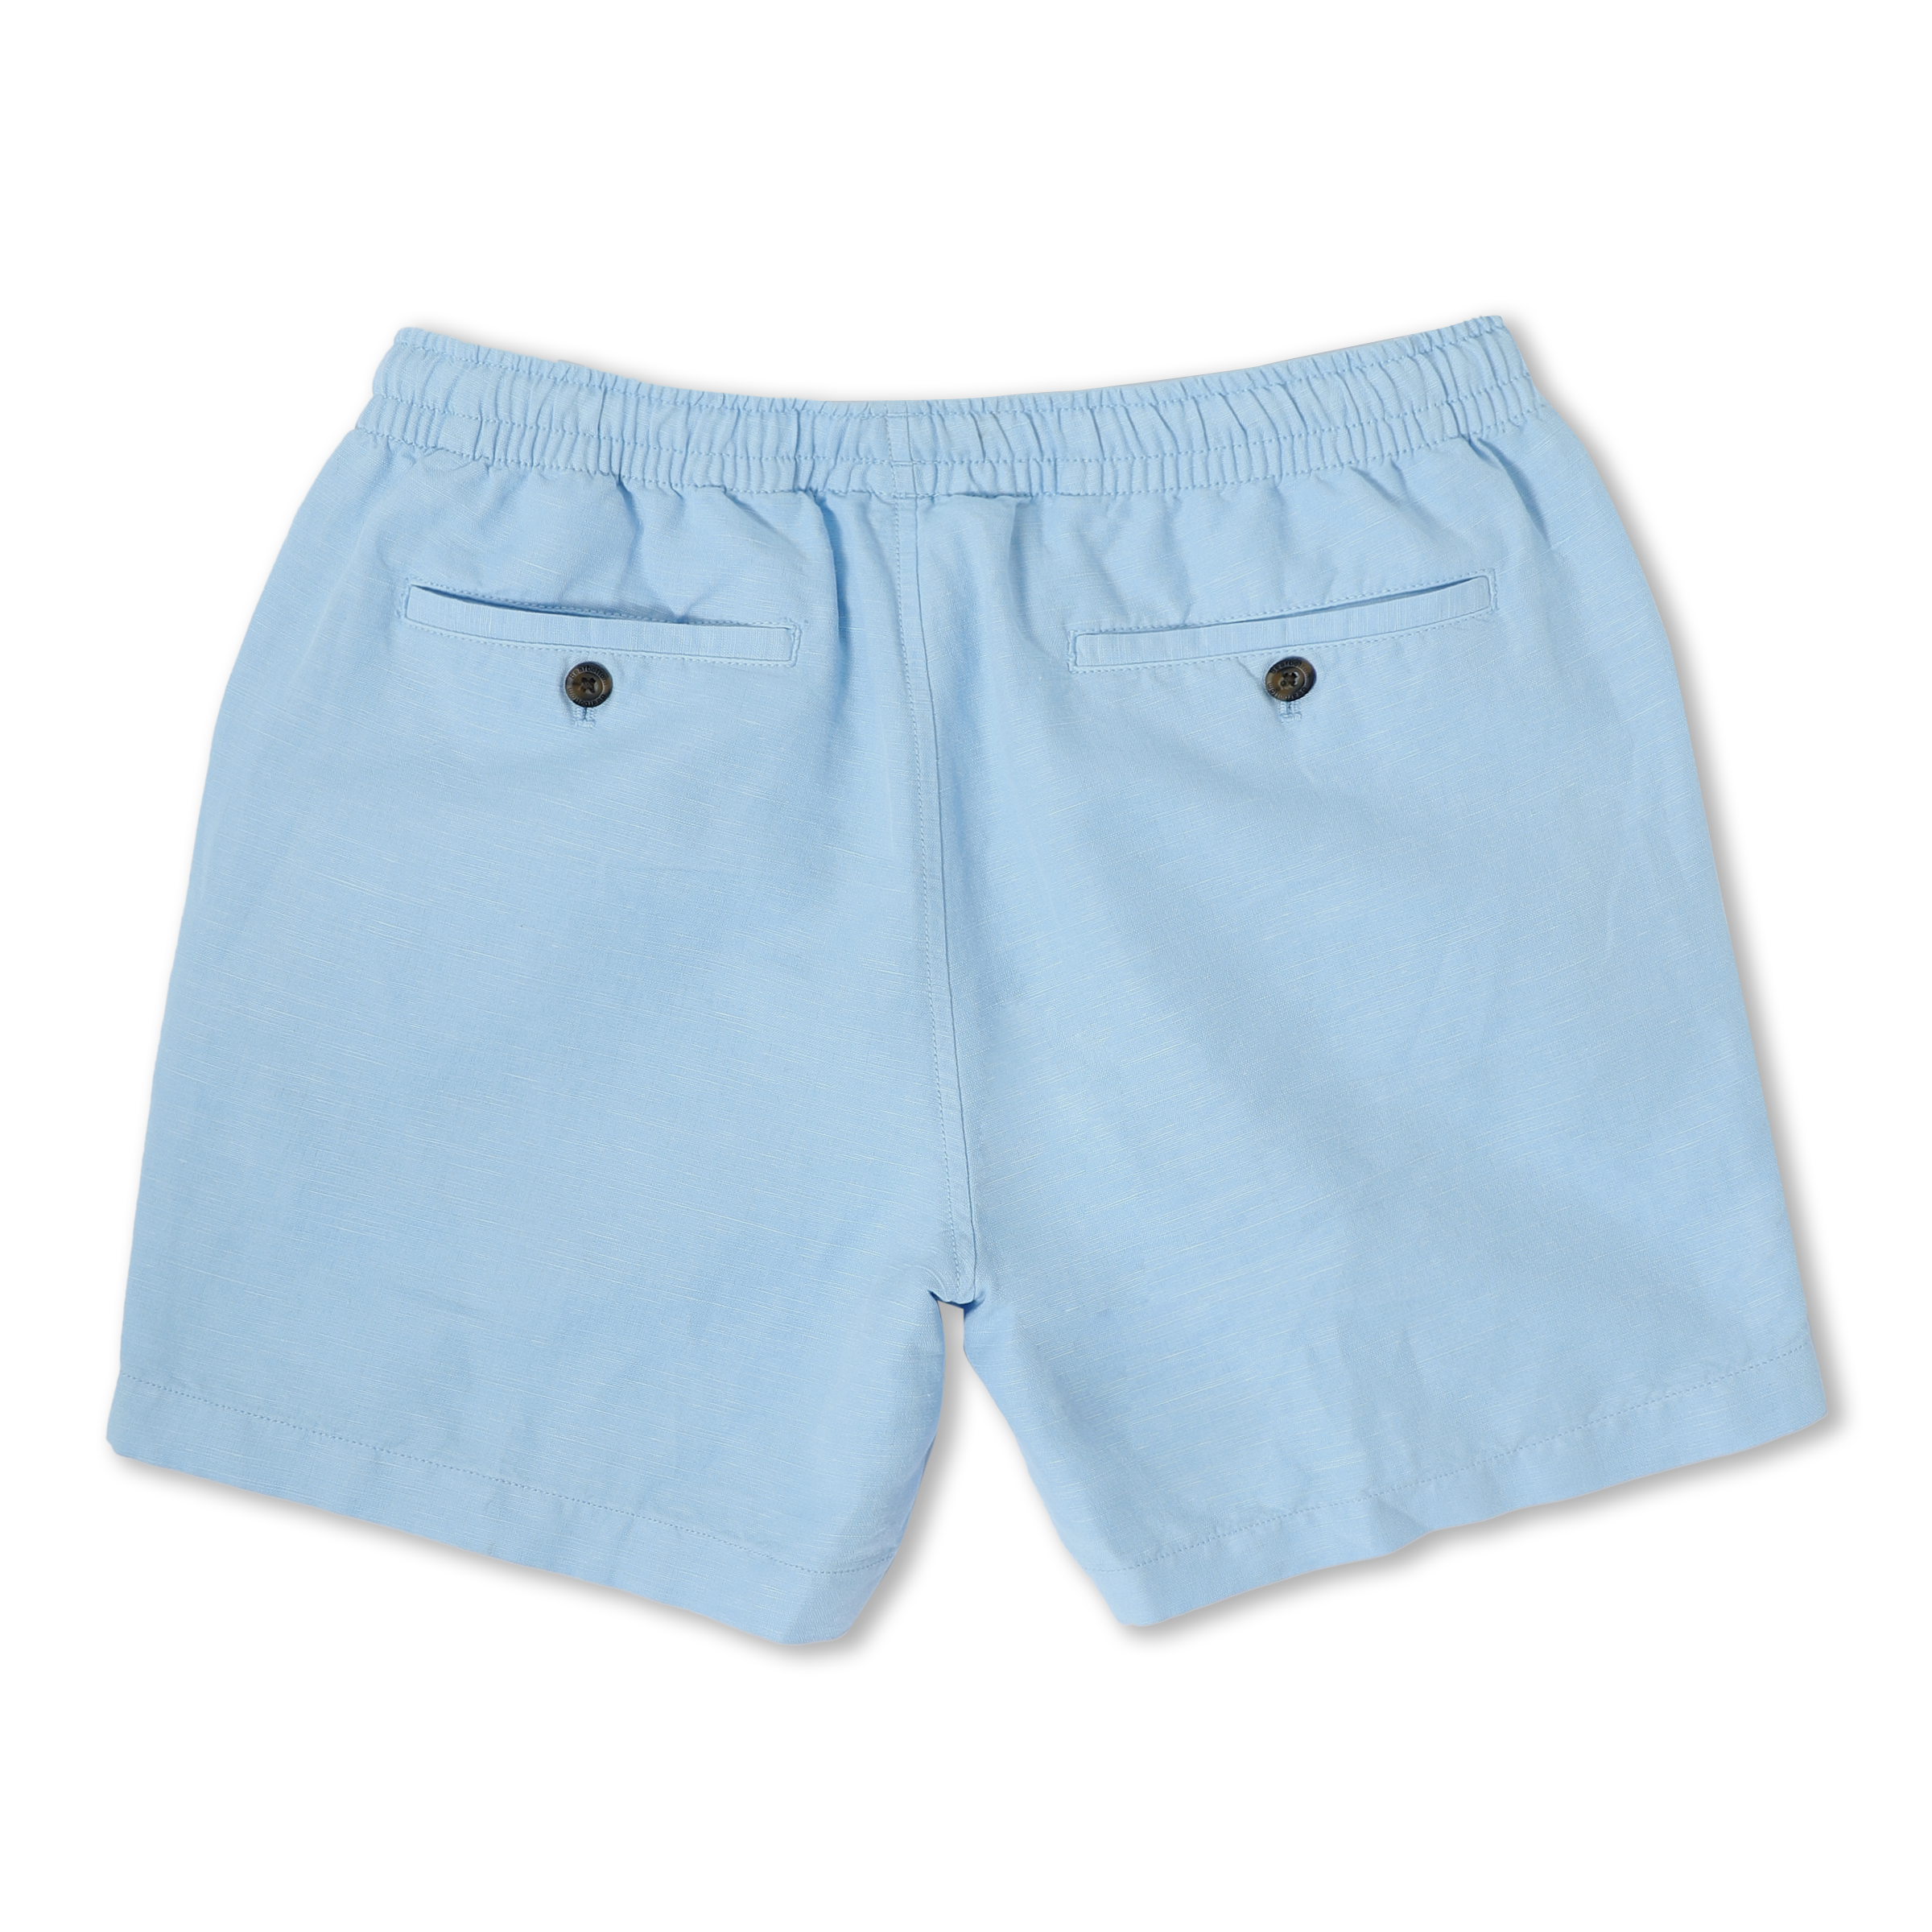 Retreat Linen Short Cool Blue back with elastic waistband and two buttoned back pockets